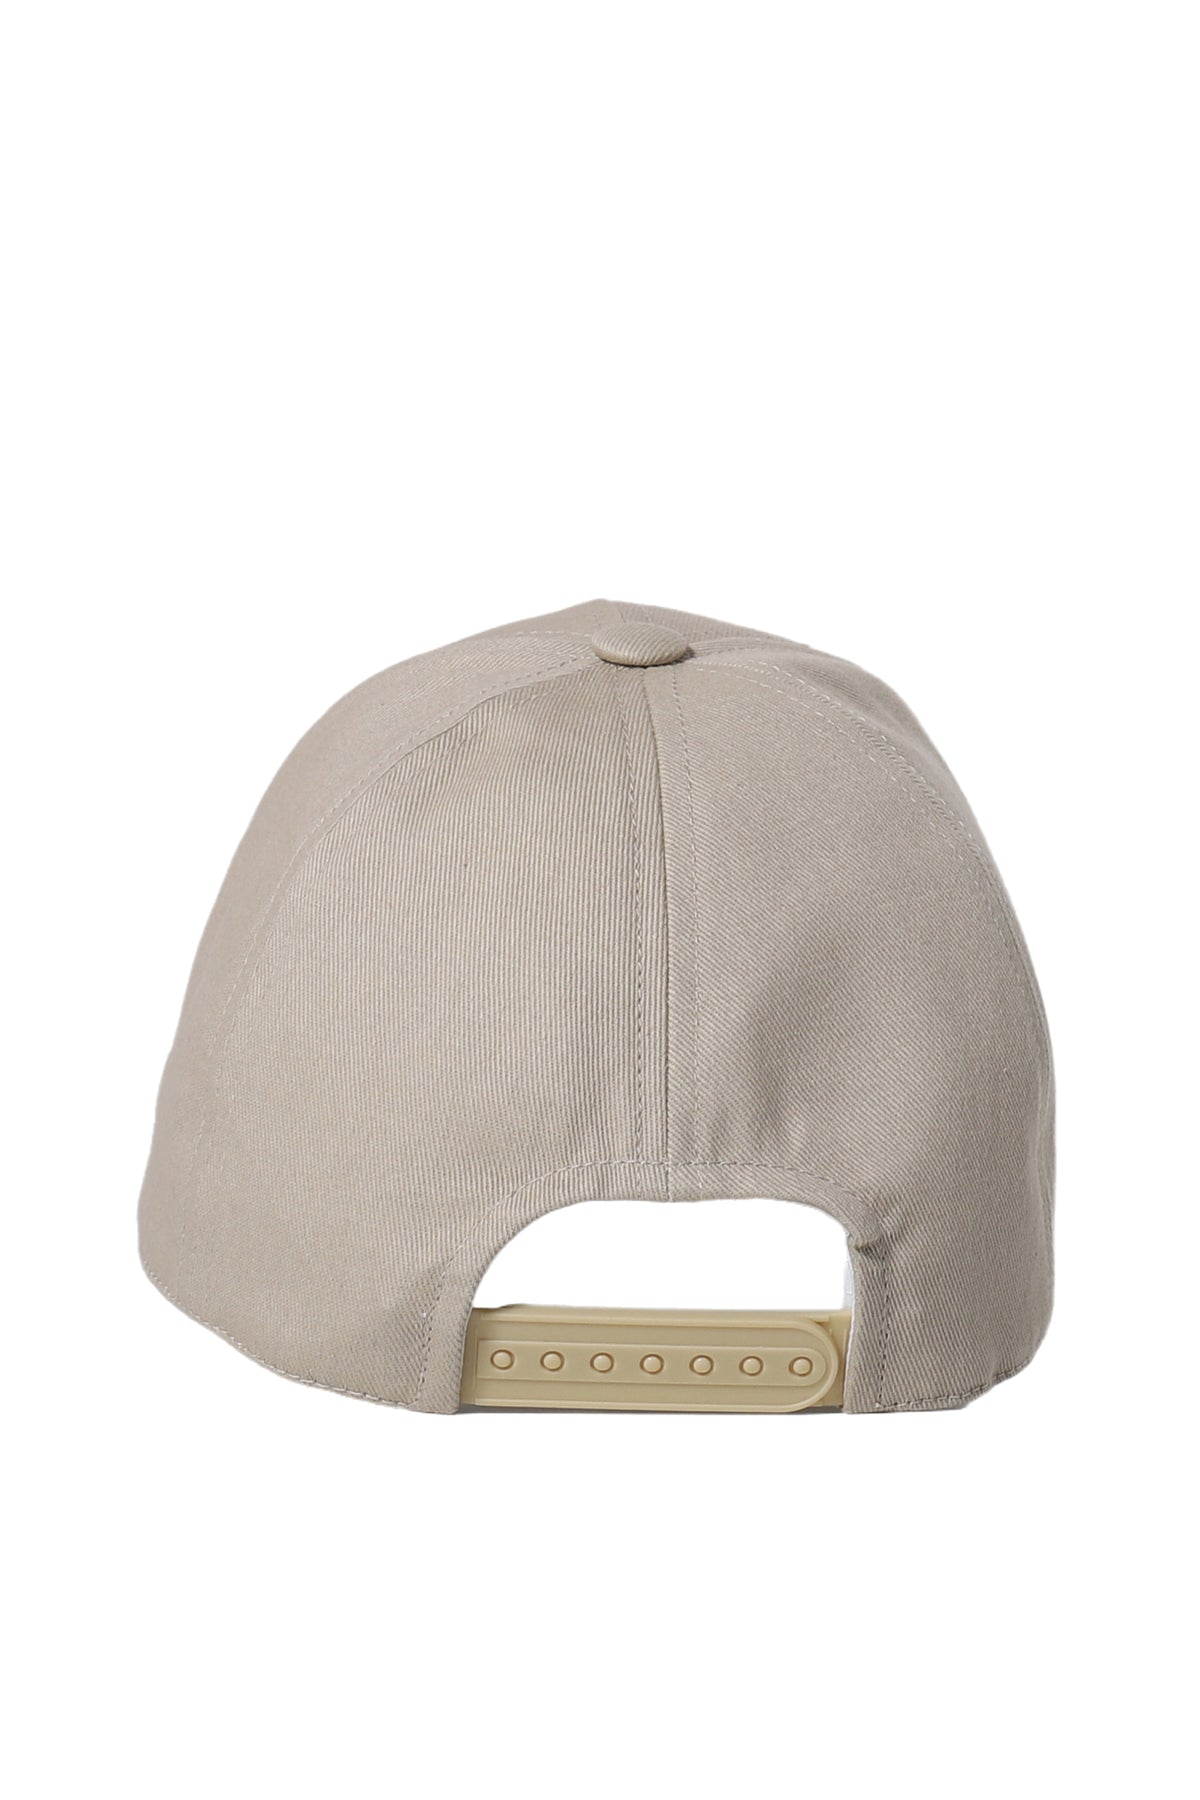 EMBROIDERED COTTON CAP / SAND